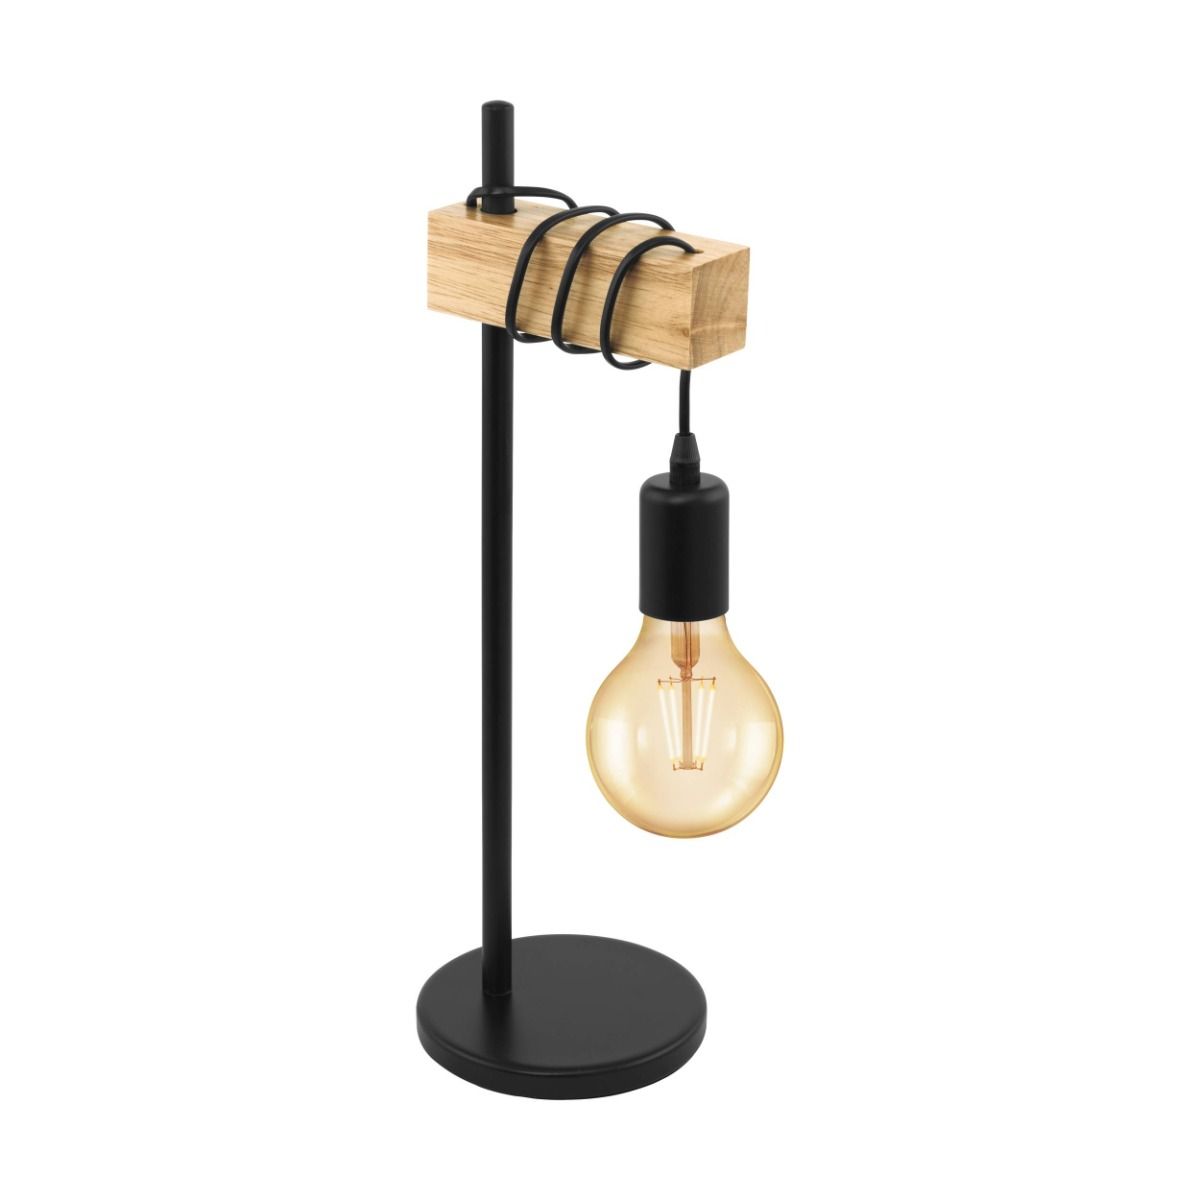 Indre Wooden Table Lamp